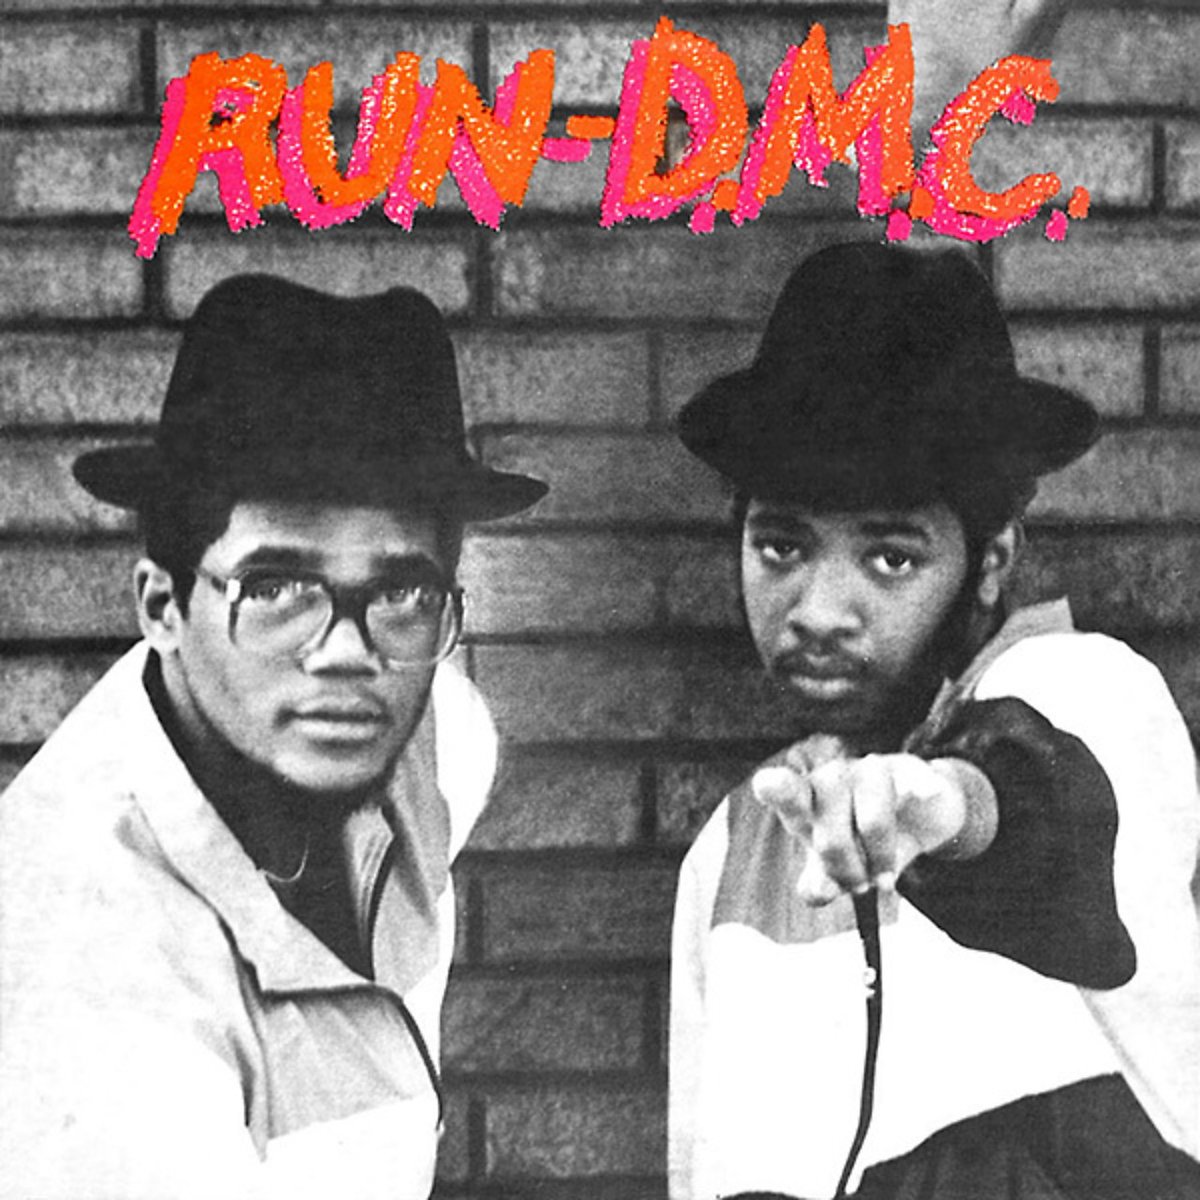 As a kid, I loved hearing rap on the radio - The Message, Buffalo Gals, (Hey You) The Rock Steady Crew. In 1984, I got my hands on Run-D.M.C. (self titled) and I've been hooked on hip hop ever since.